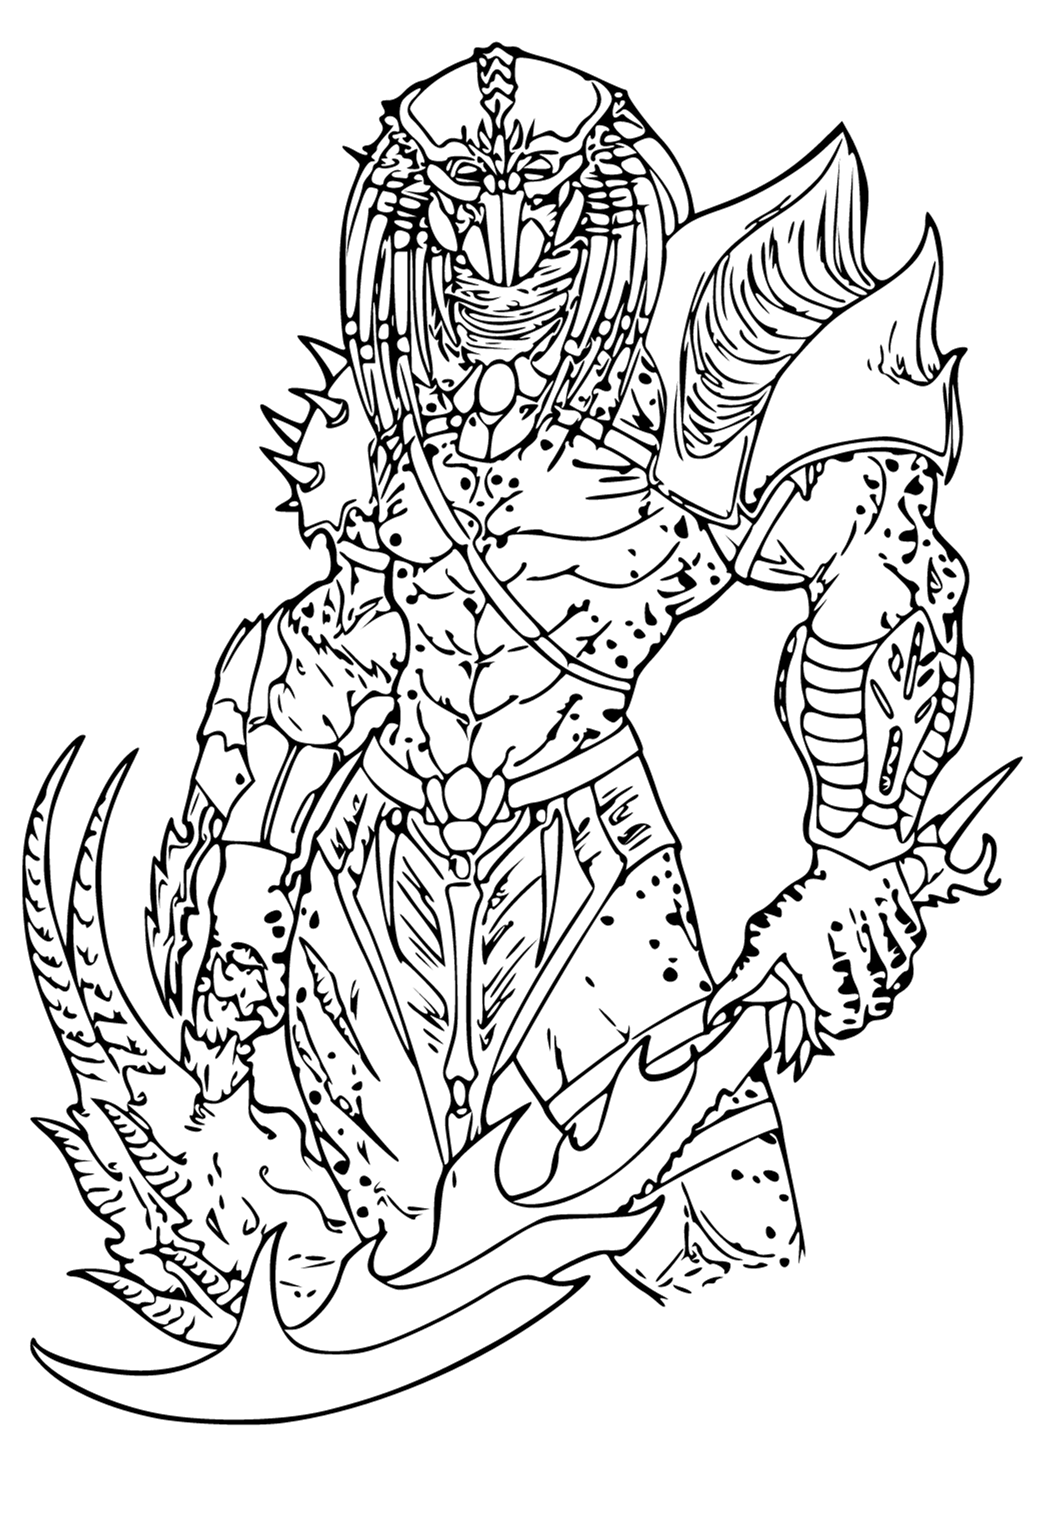 Free printable predator sword coloring page for adults and kids